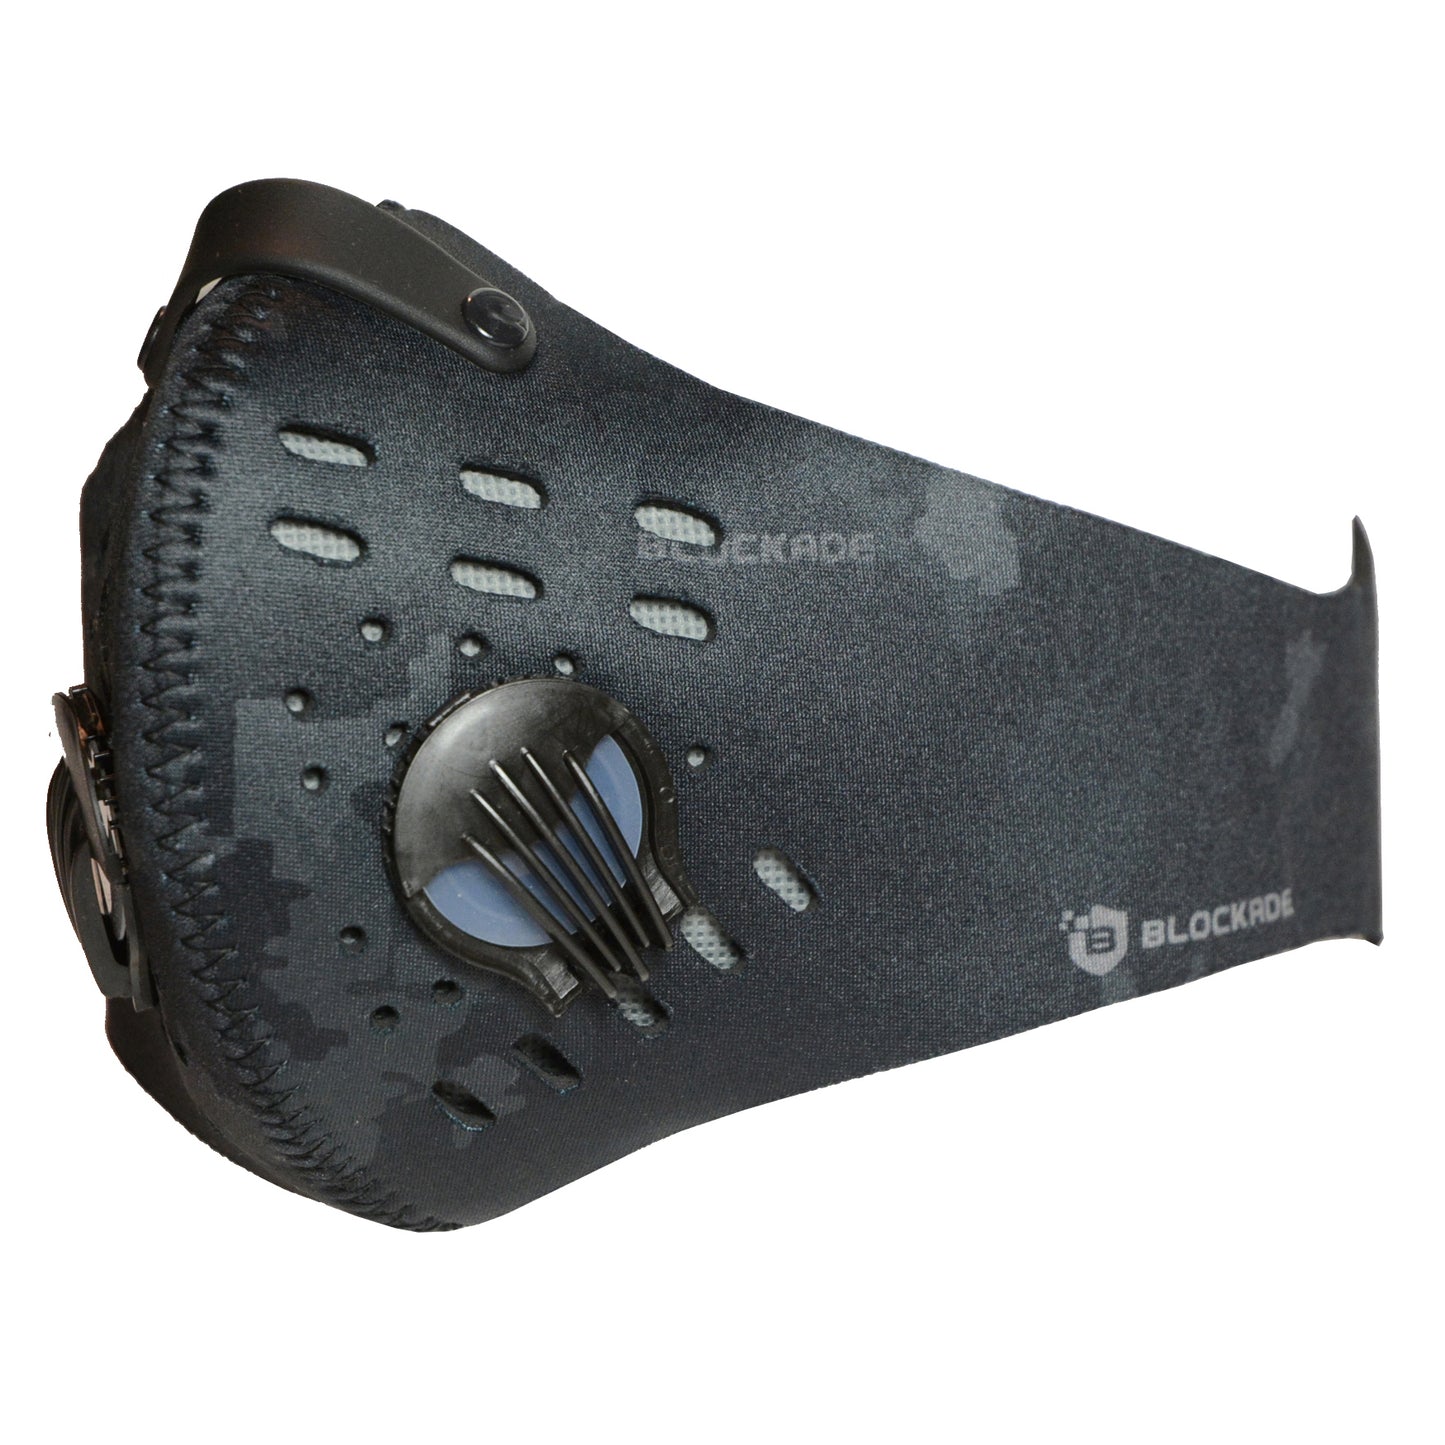 Black Camouflage Face Covering with Breathing Valves and Filter - Black Camo Face Cover